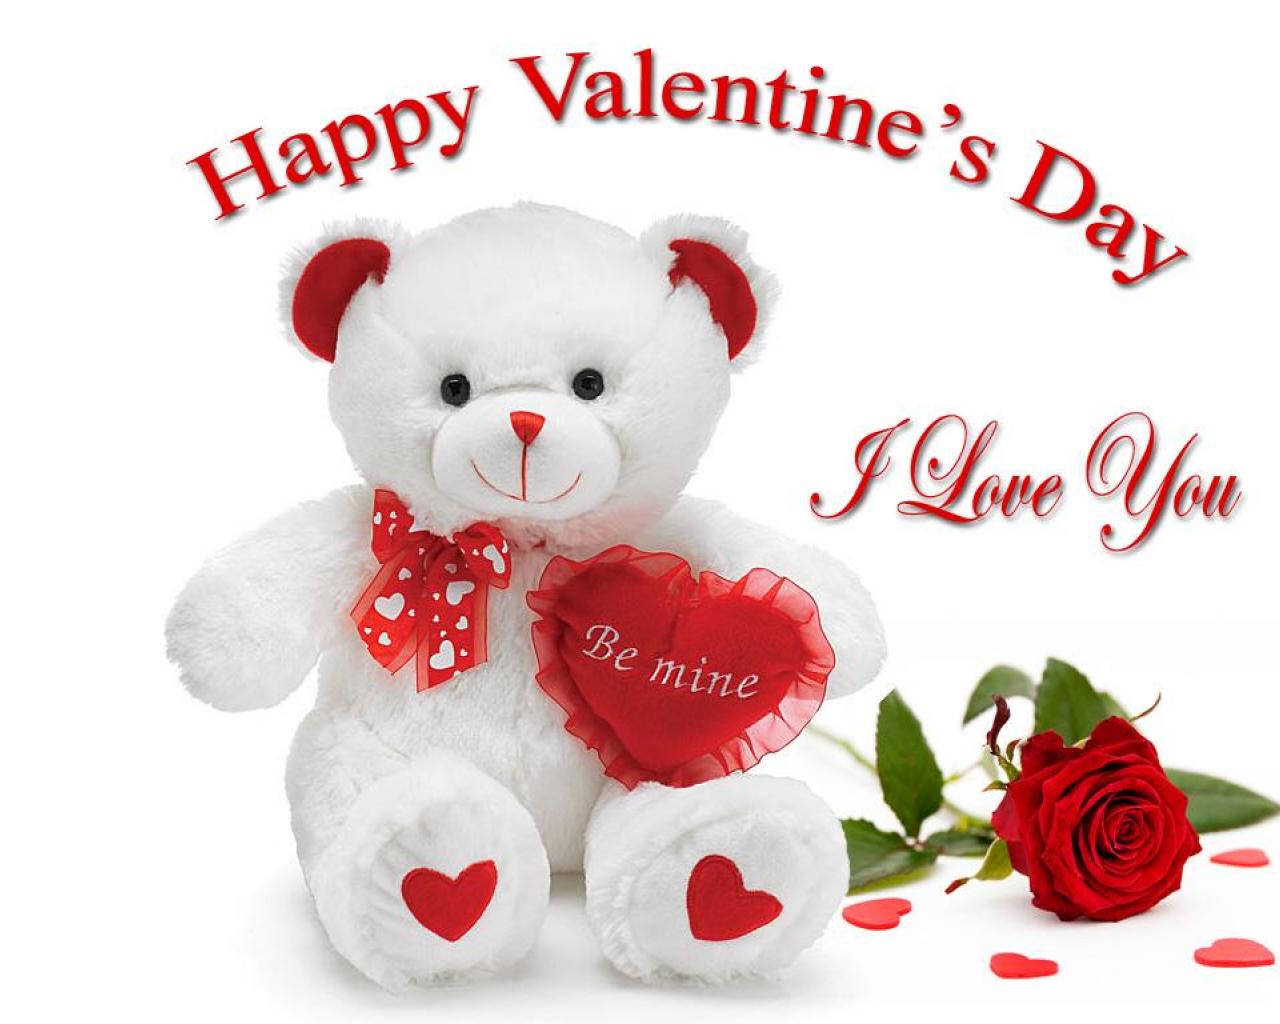 HAPPY VALENTINE S DAY WALLPAPER   54981   HD Wallpapers